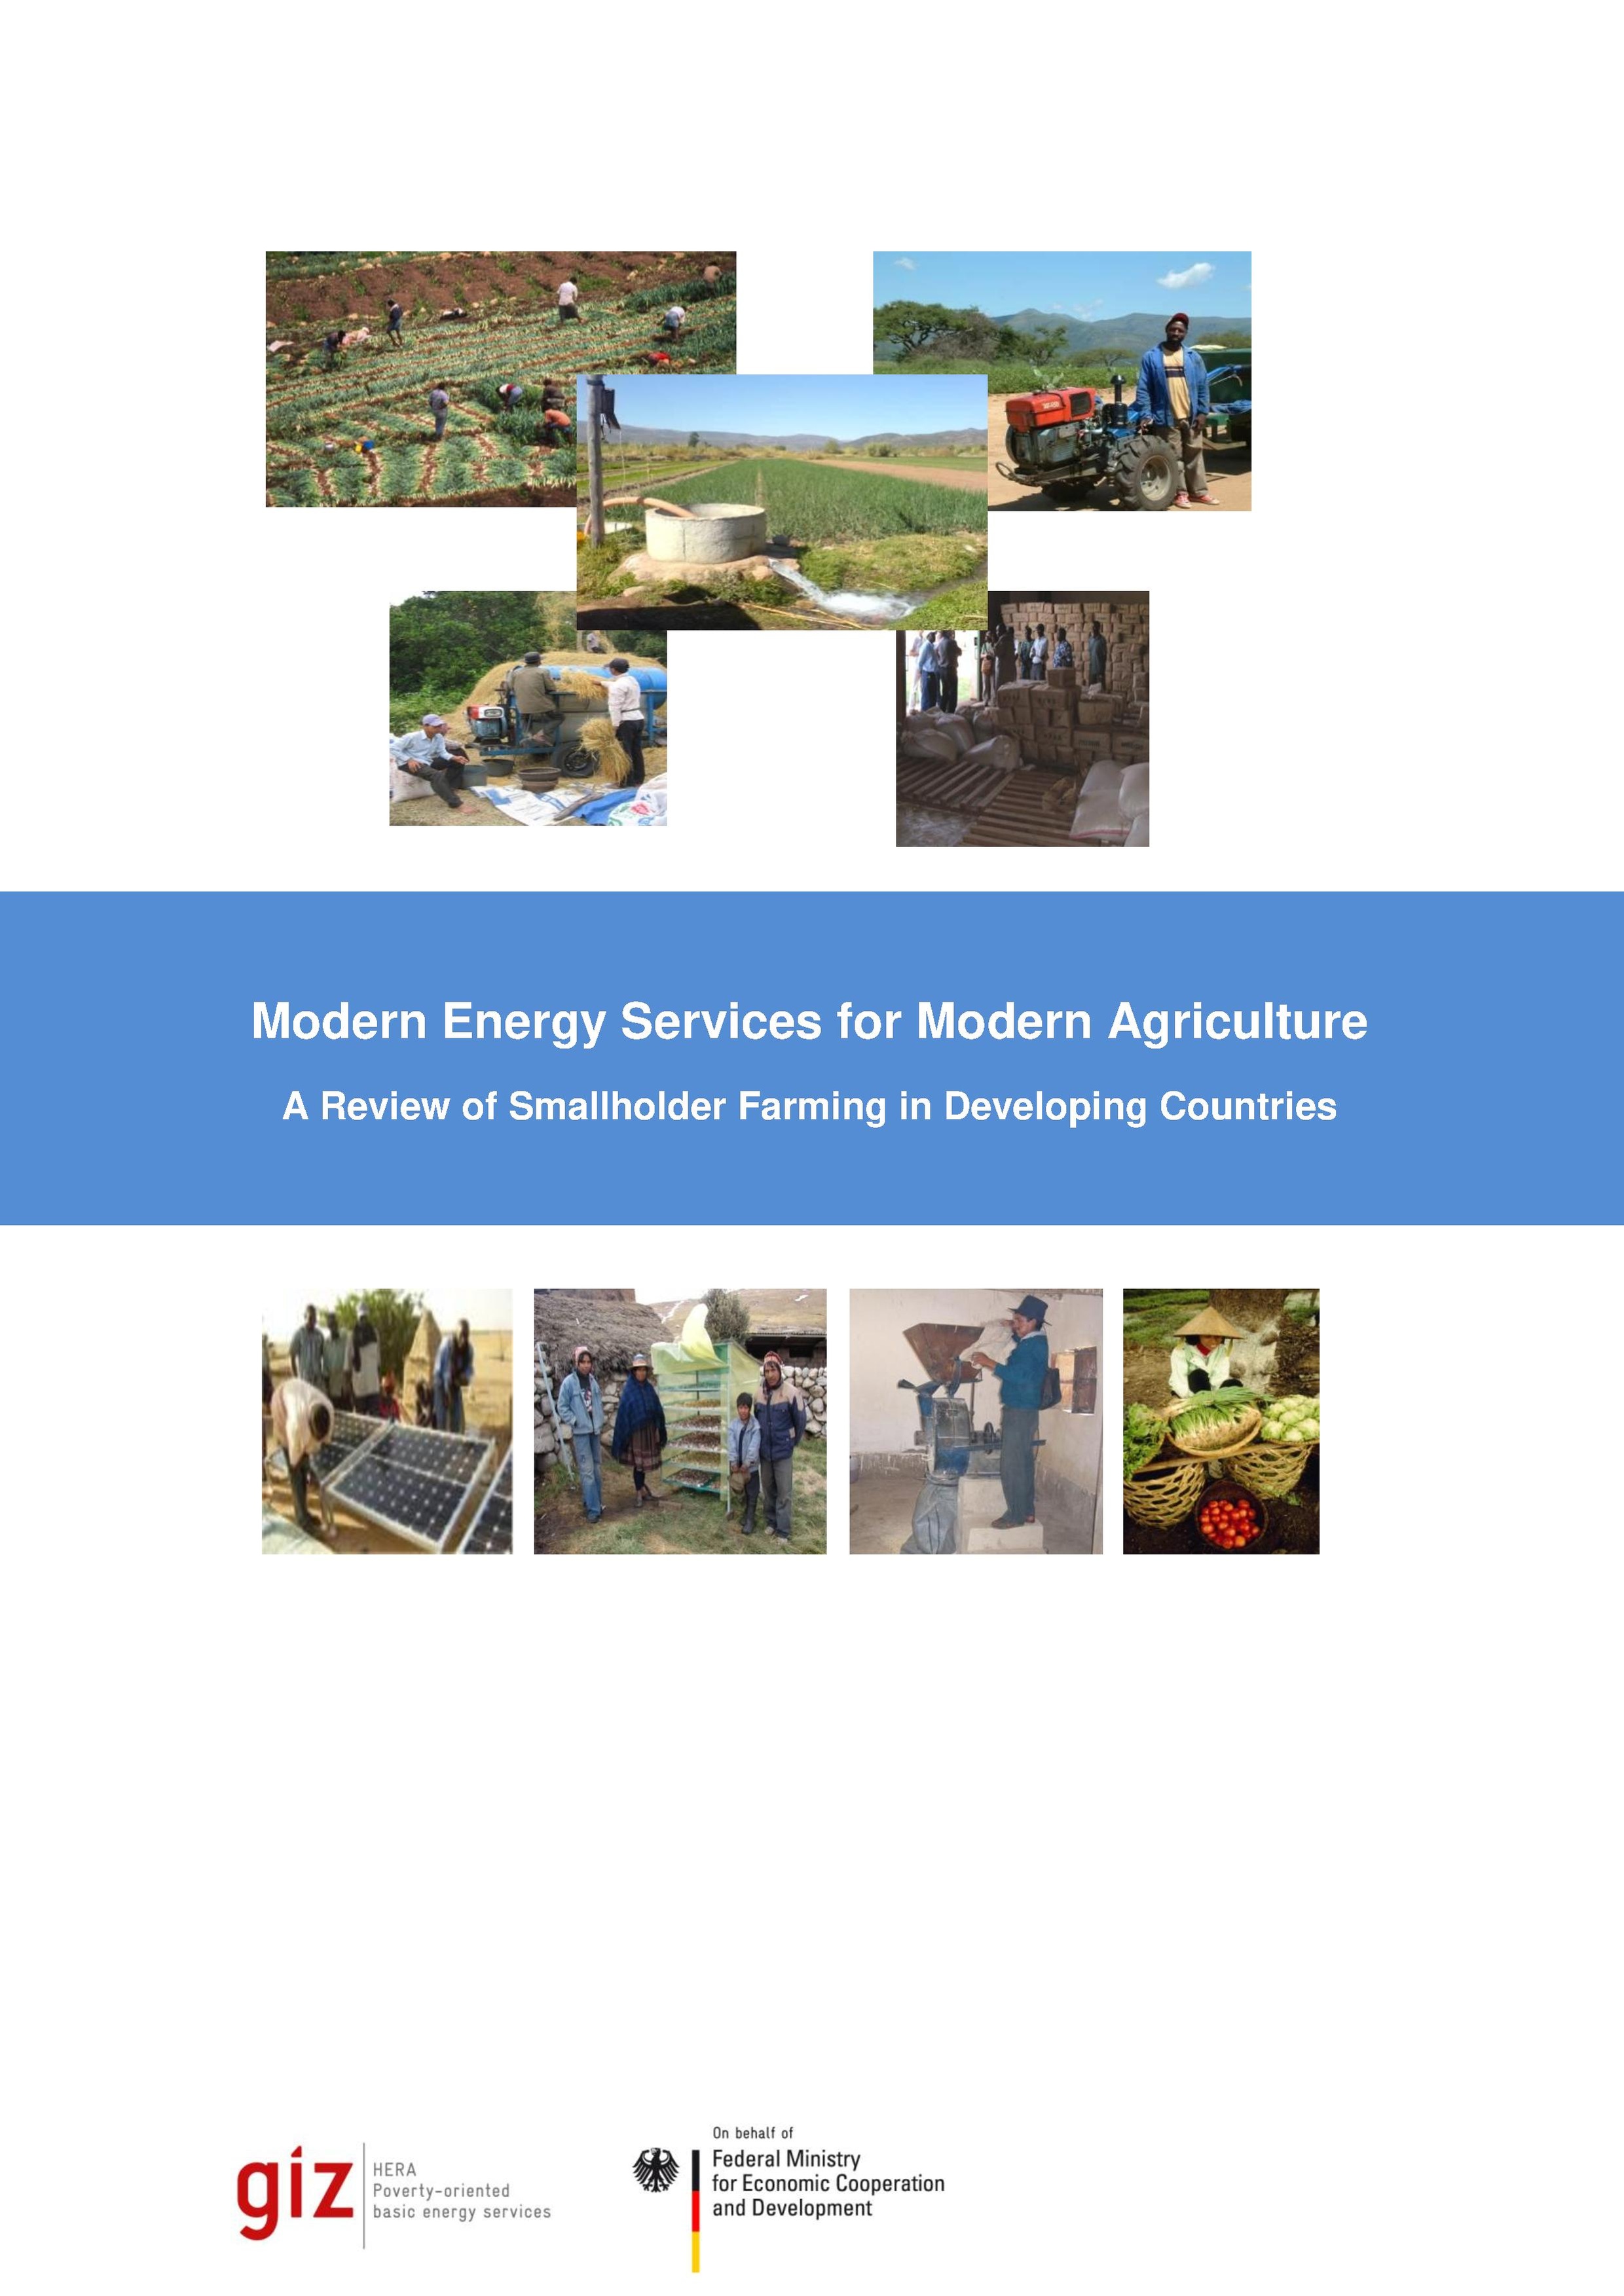 Modern Energy Services for Modern Agriculture - A Review of Smallholder Farming in Developing Countries.